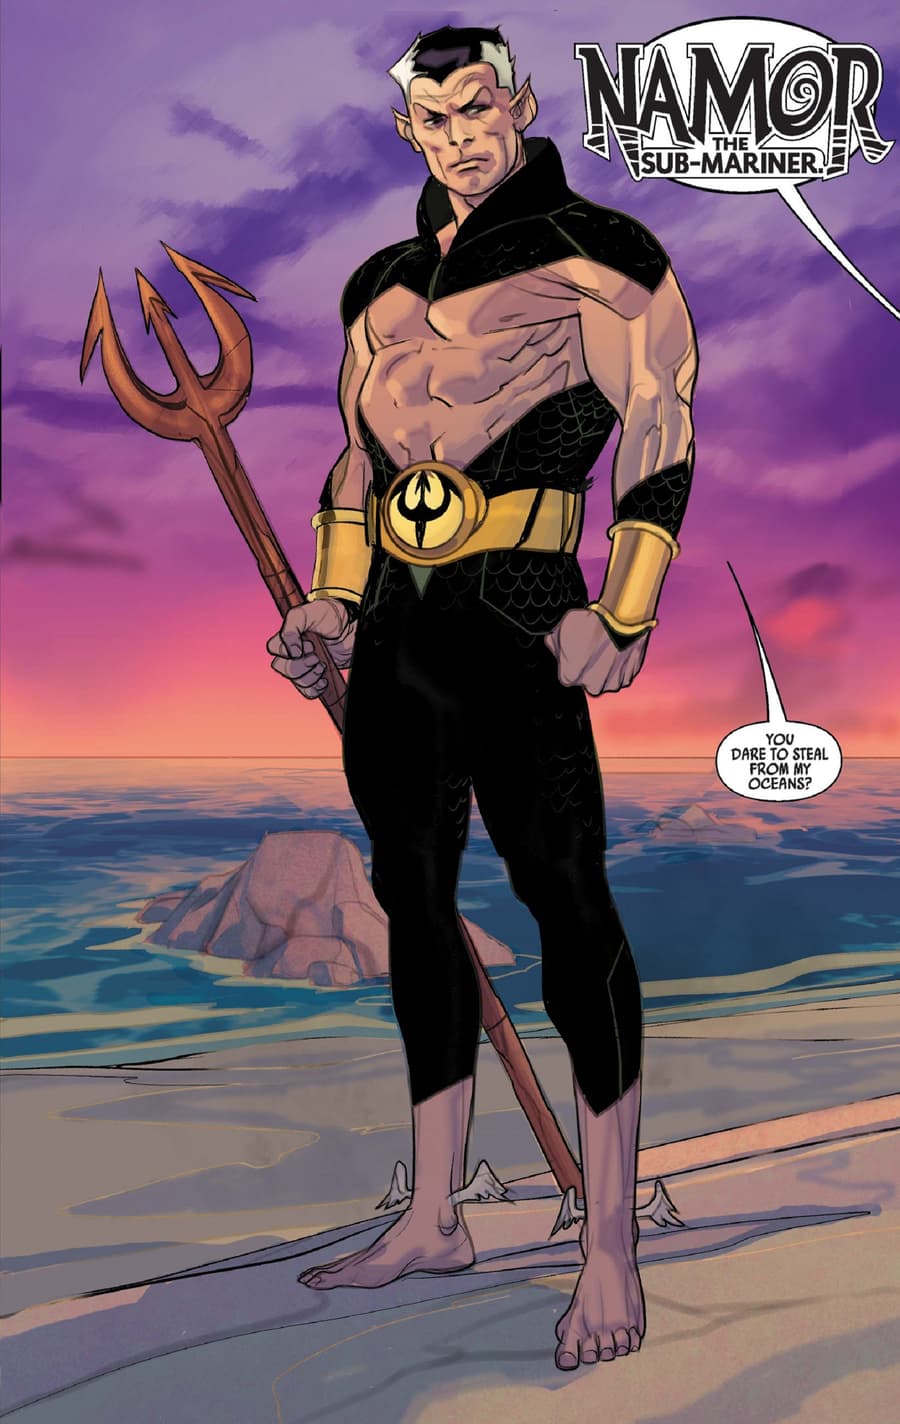 Preview from NAMOR: CONQUERED SHORES (2022) #1 with art by Pasqual Ferry and Matt Hollingsworth.